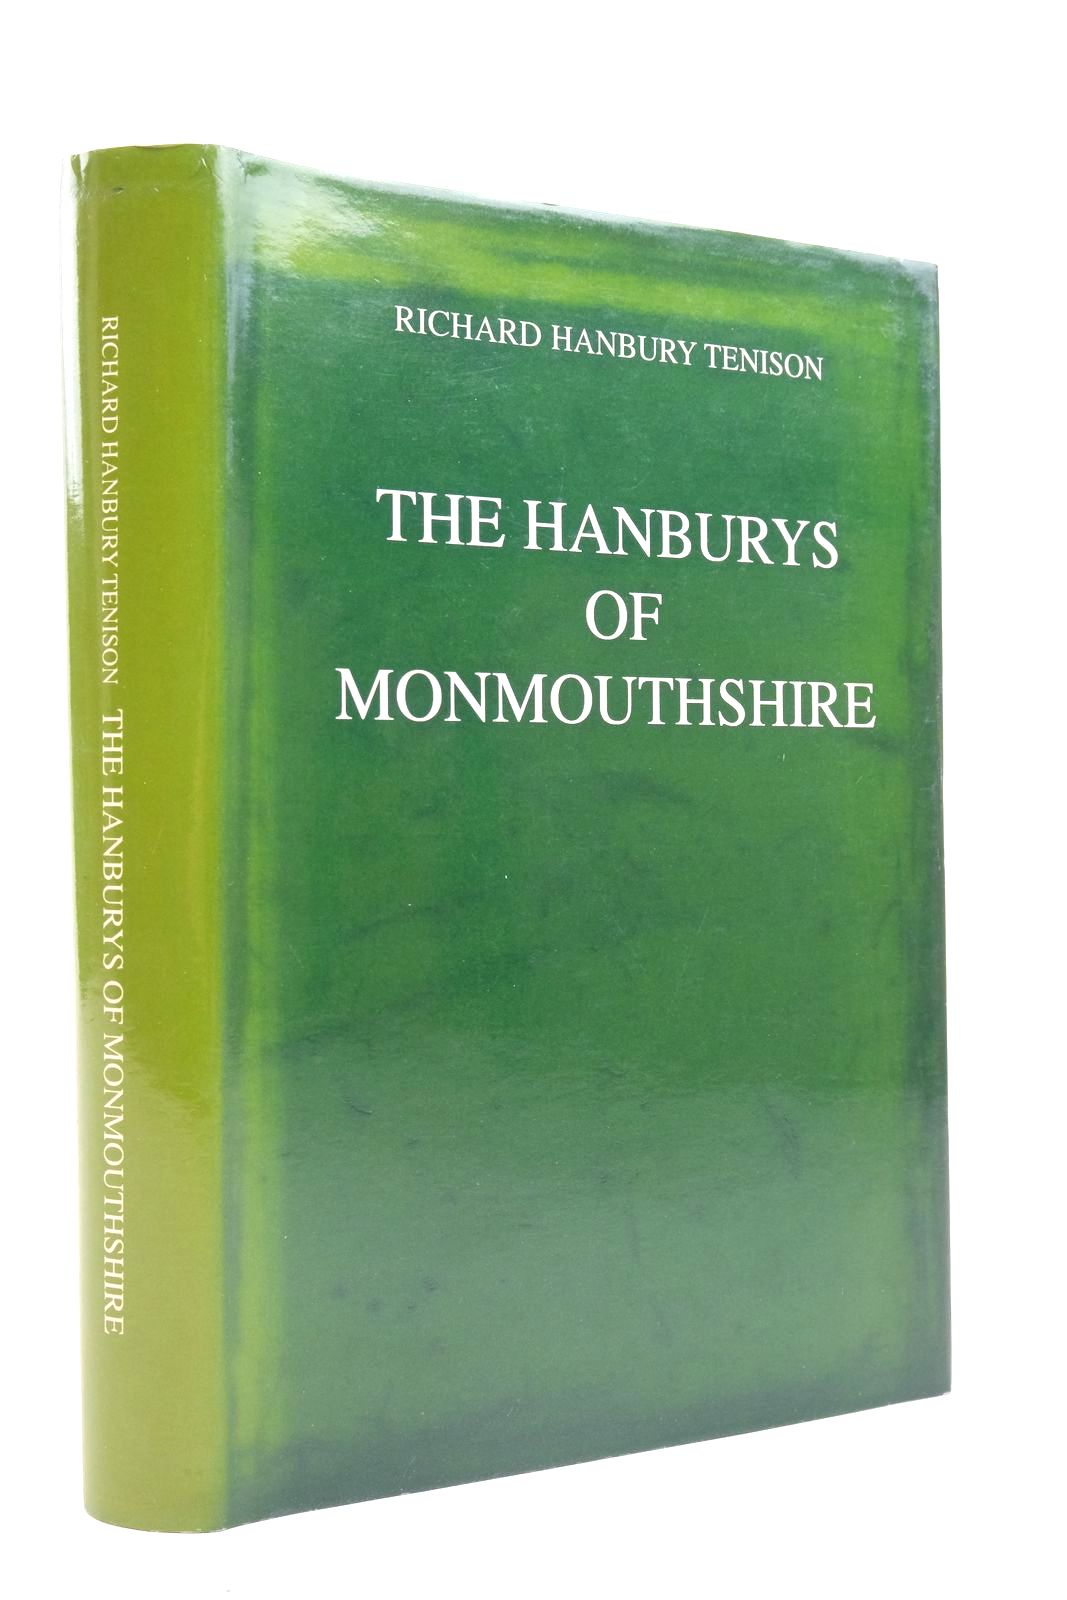 Photo of THE HANBURYS OF MONMOUTHSHIRE written by Tenison, Richard Hanbury published by The National Library of Wales (STOCK CODE: 2137104)  for sale by Stella & Rose's Books